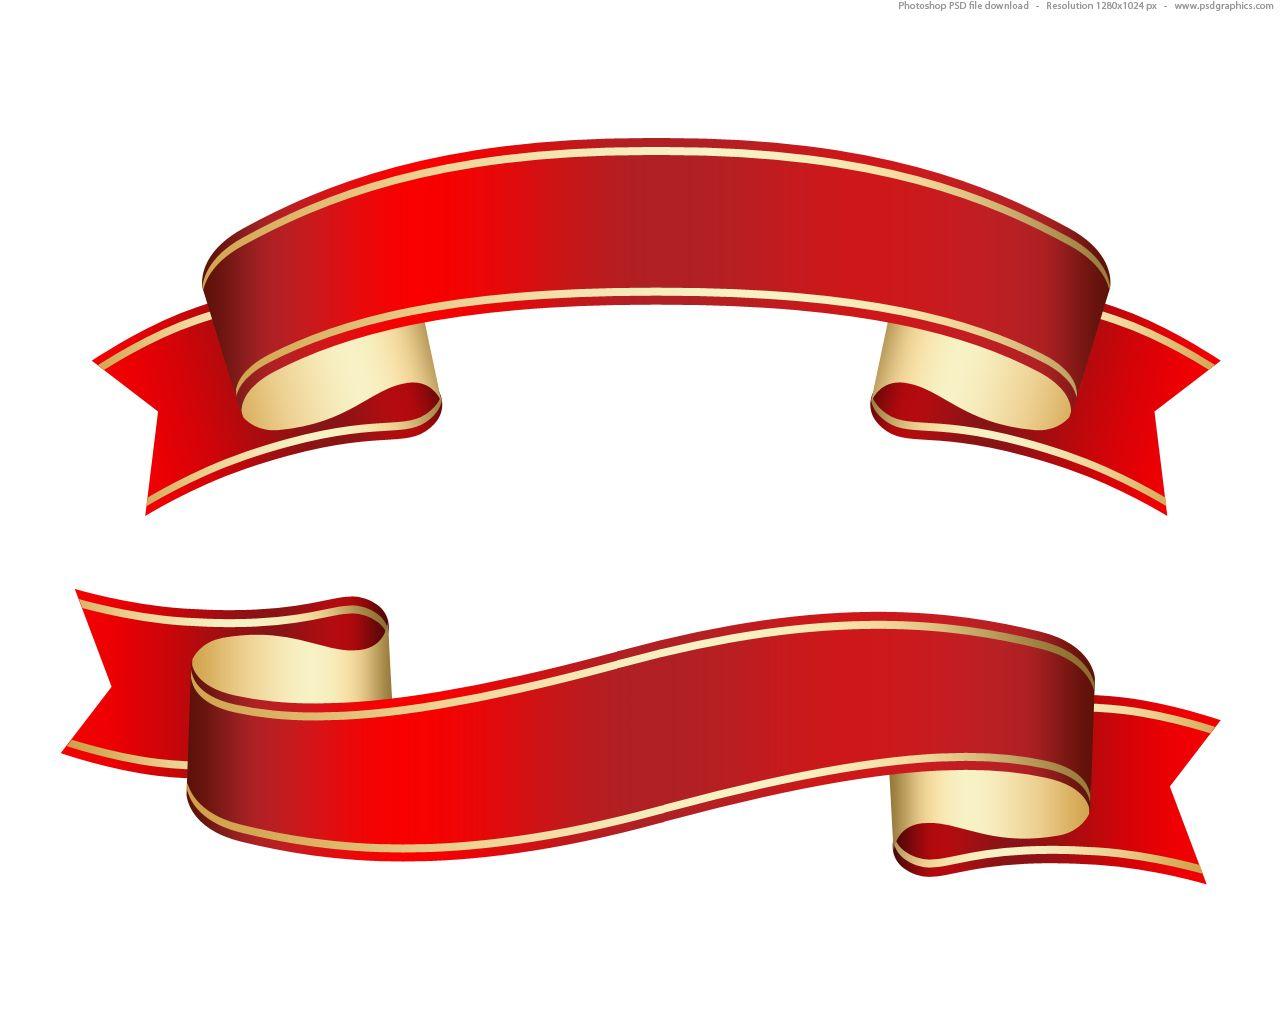 Red and Gold Ribbon Logo - red ribbon design.wagenaardentistry.com